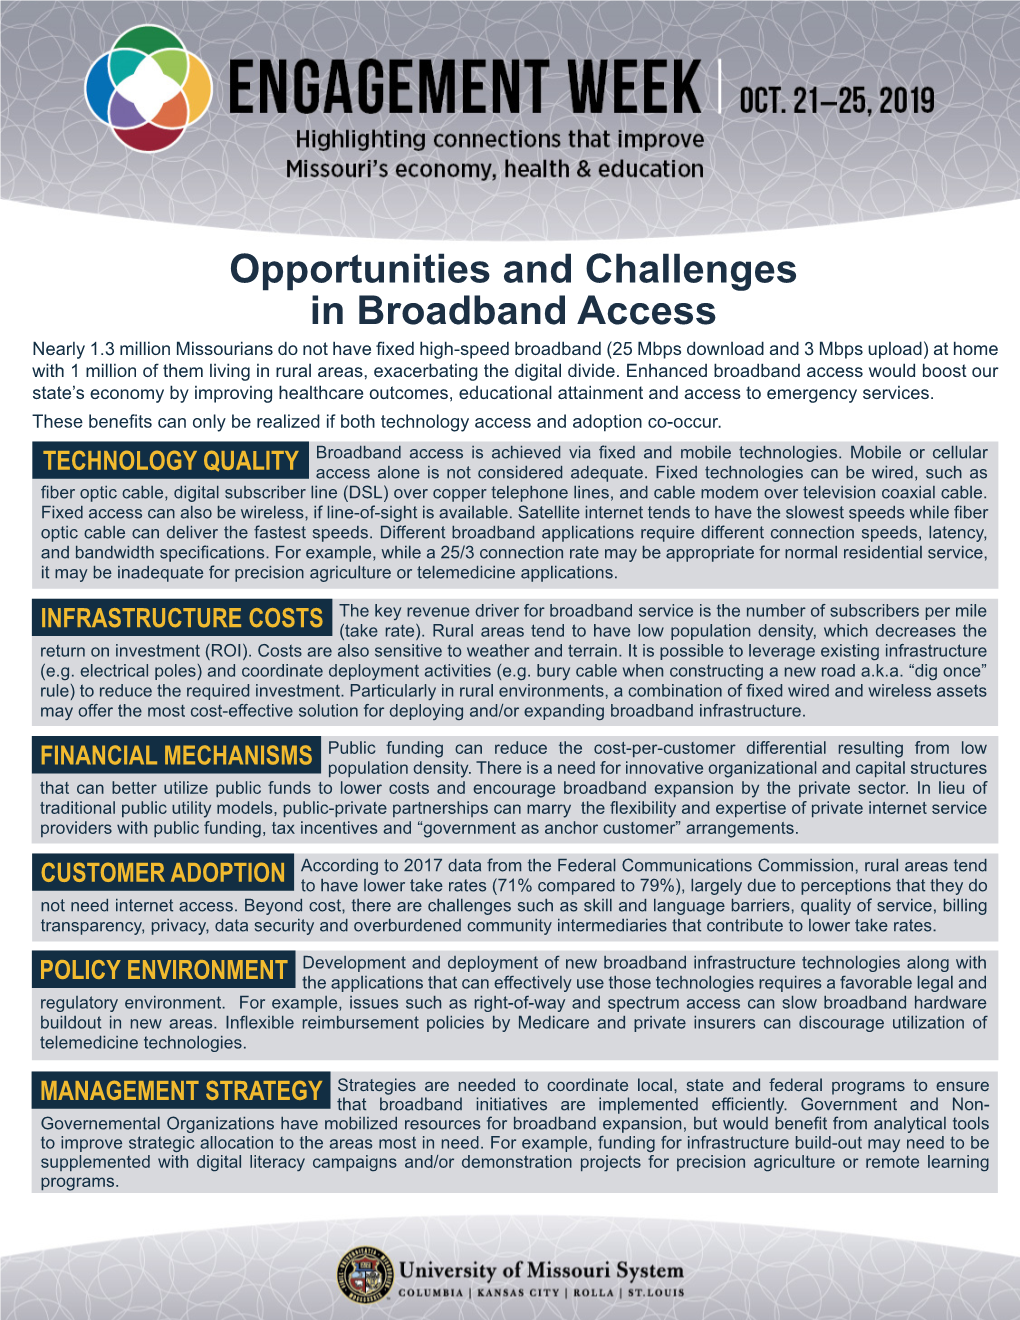 Opportunities and Challenges in Broadband Access